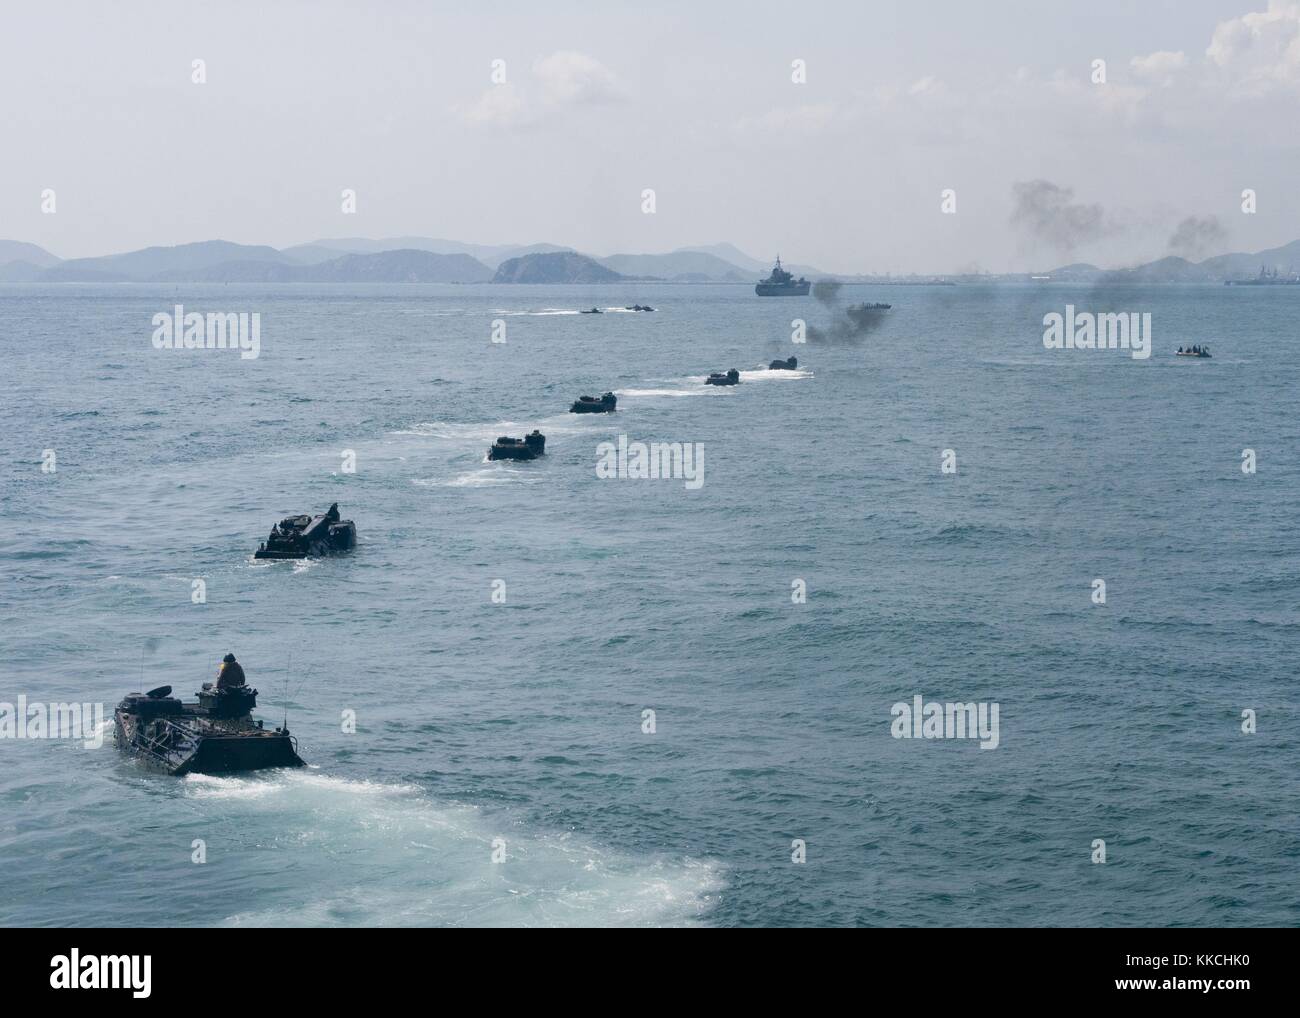 Marines assigned to 4th Marine Regiment drive their amphibious assault vehicles from the amphibious dock landing ship USS Germantown LSD 42 during a rehearsal for a joint US and Royal Thai Navy beach landing, Pacific Ocean. Image courtesy Ensign Jason M. Tross/US Navy. 2012. Stock Photo